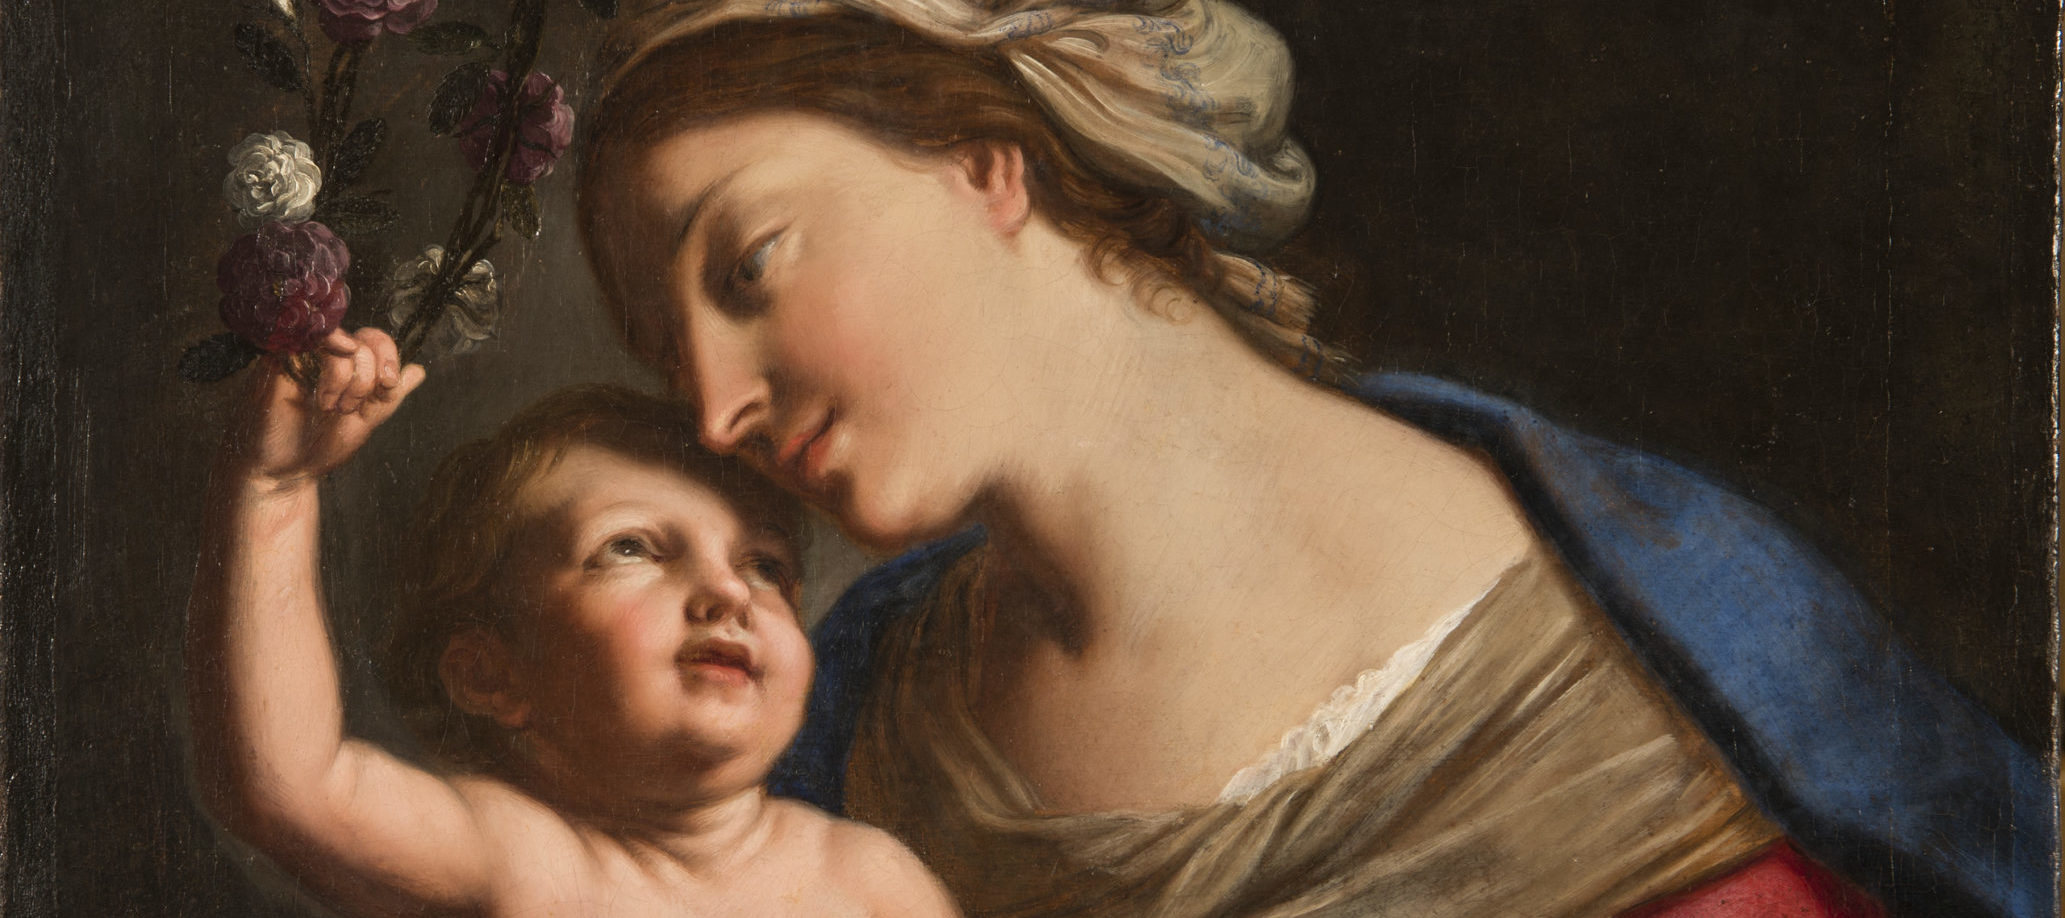 A young, light-skinned, brunette woman gazes down lovingly at the plump baby she holds on her lap. She wears a loose, tan turban, vivid blue cloak, and red dress with white sleeves. The light-skinned child returns her gaze, leaning back to crown the woman with a circlet of roses.